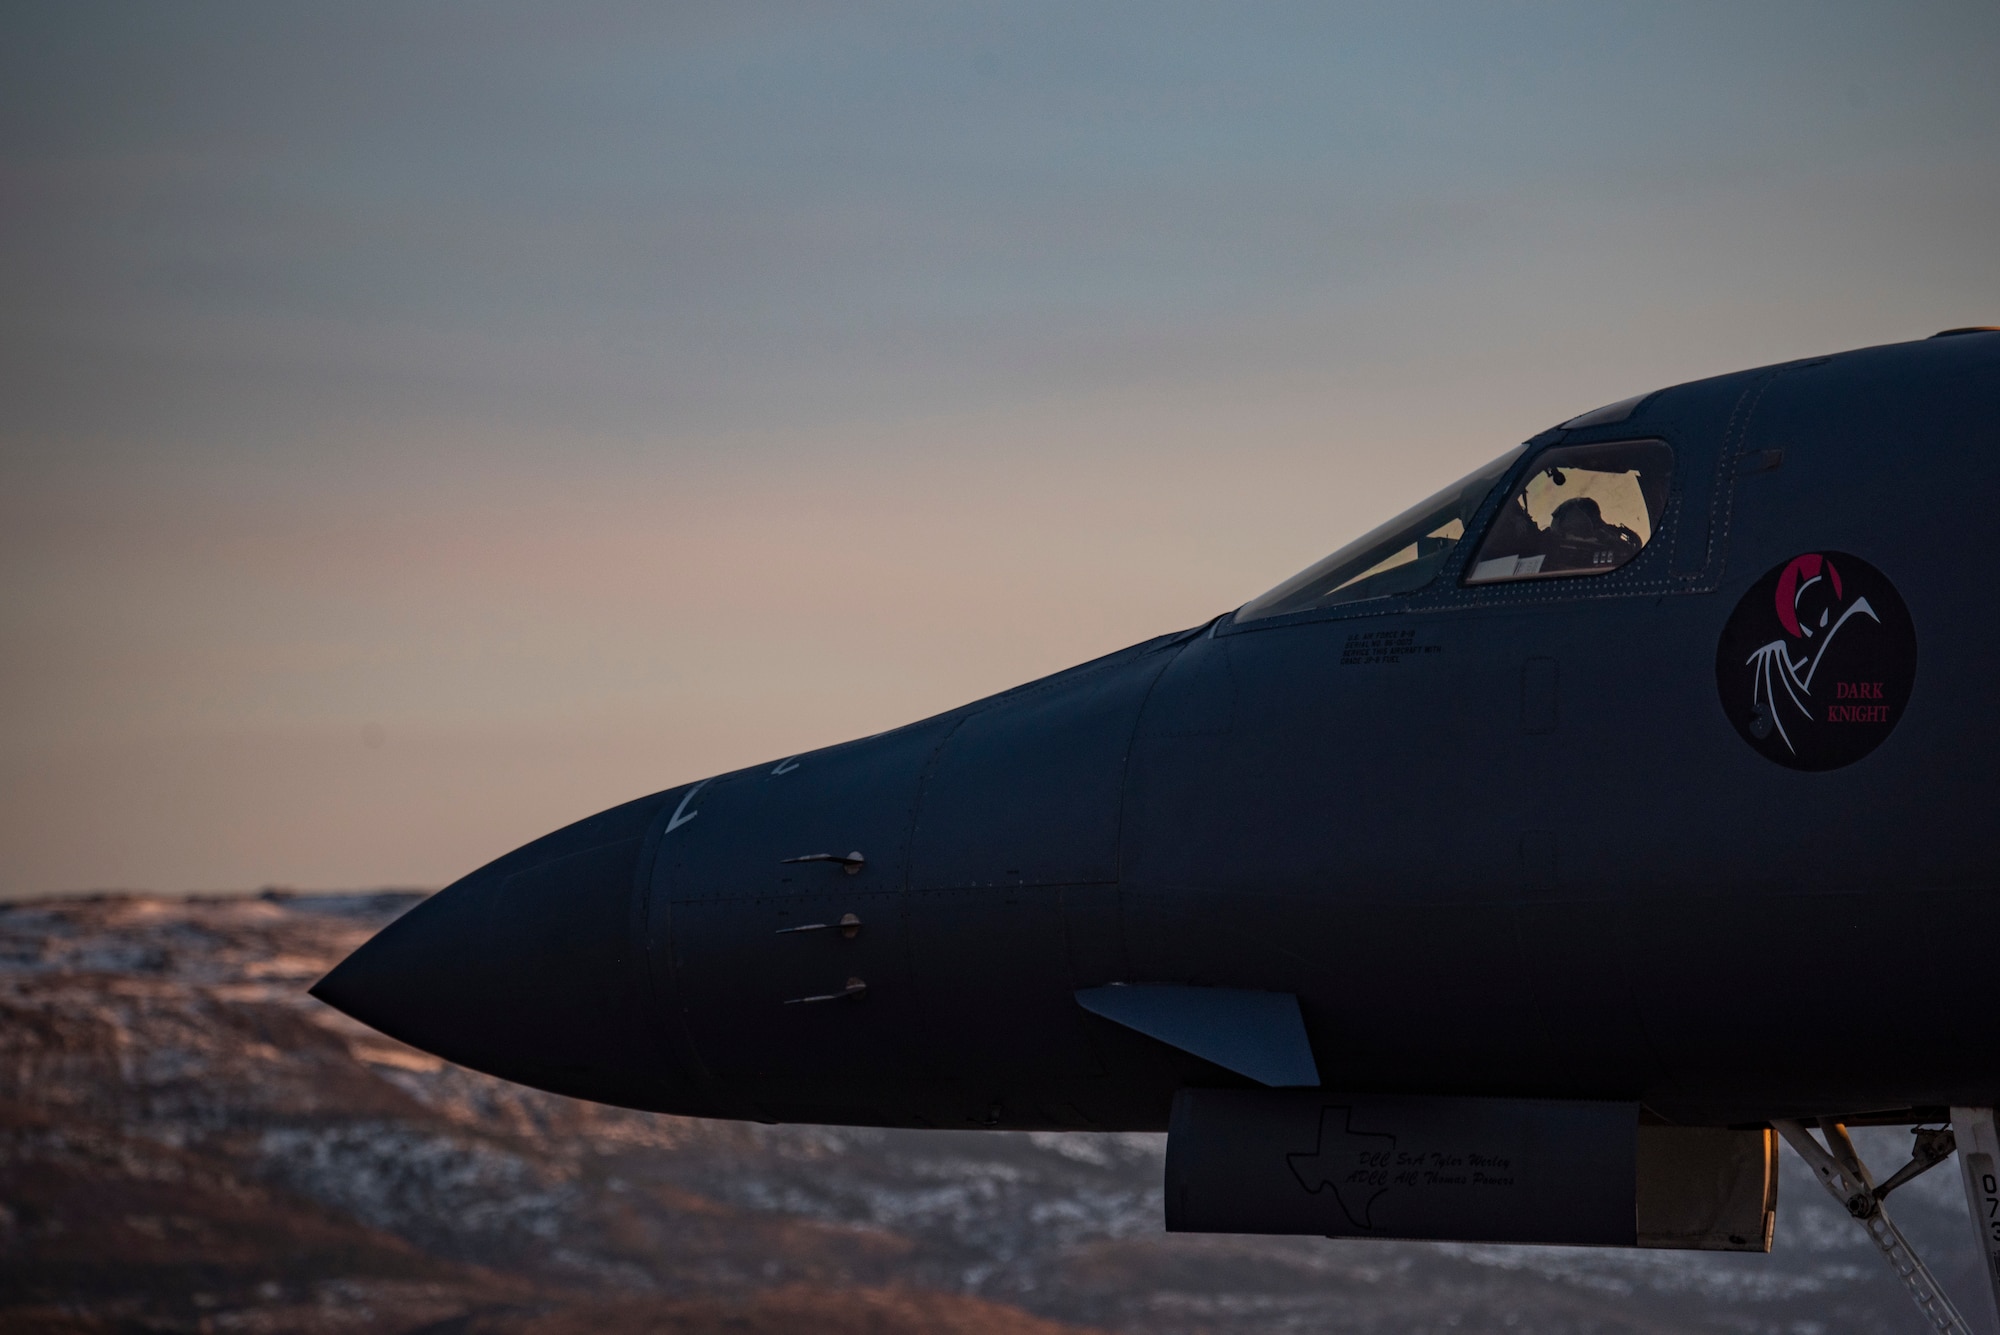 A pilot assigned to the 9th Expeditionary Bomb Squadron prepares a B-1B Lancer for takeoff at Ørland Air Force Station, Norway, March 14, 2021. The 9th EBS participated in several Bomber Task Force Europe training missions while integrating with NATO allies and partner forces. (U.S. Air Force photo by Airman 1st Class Colin Hollowell)